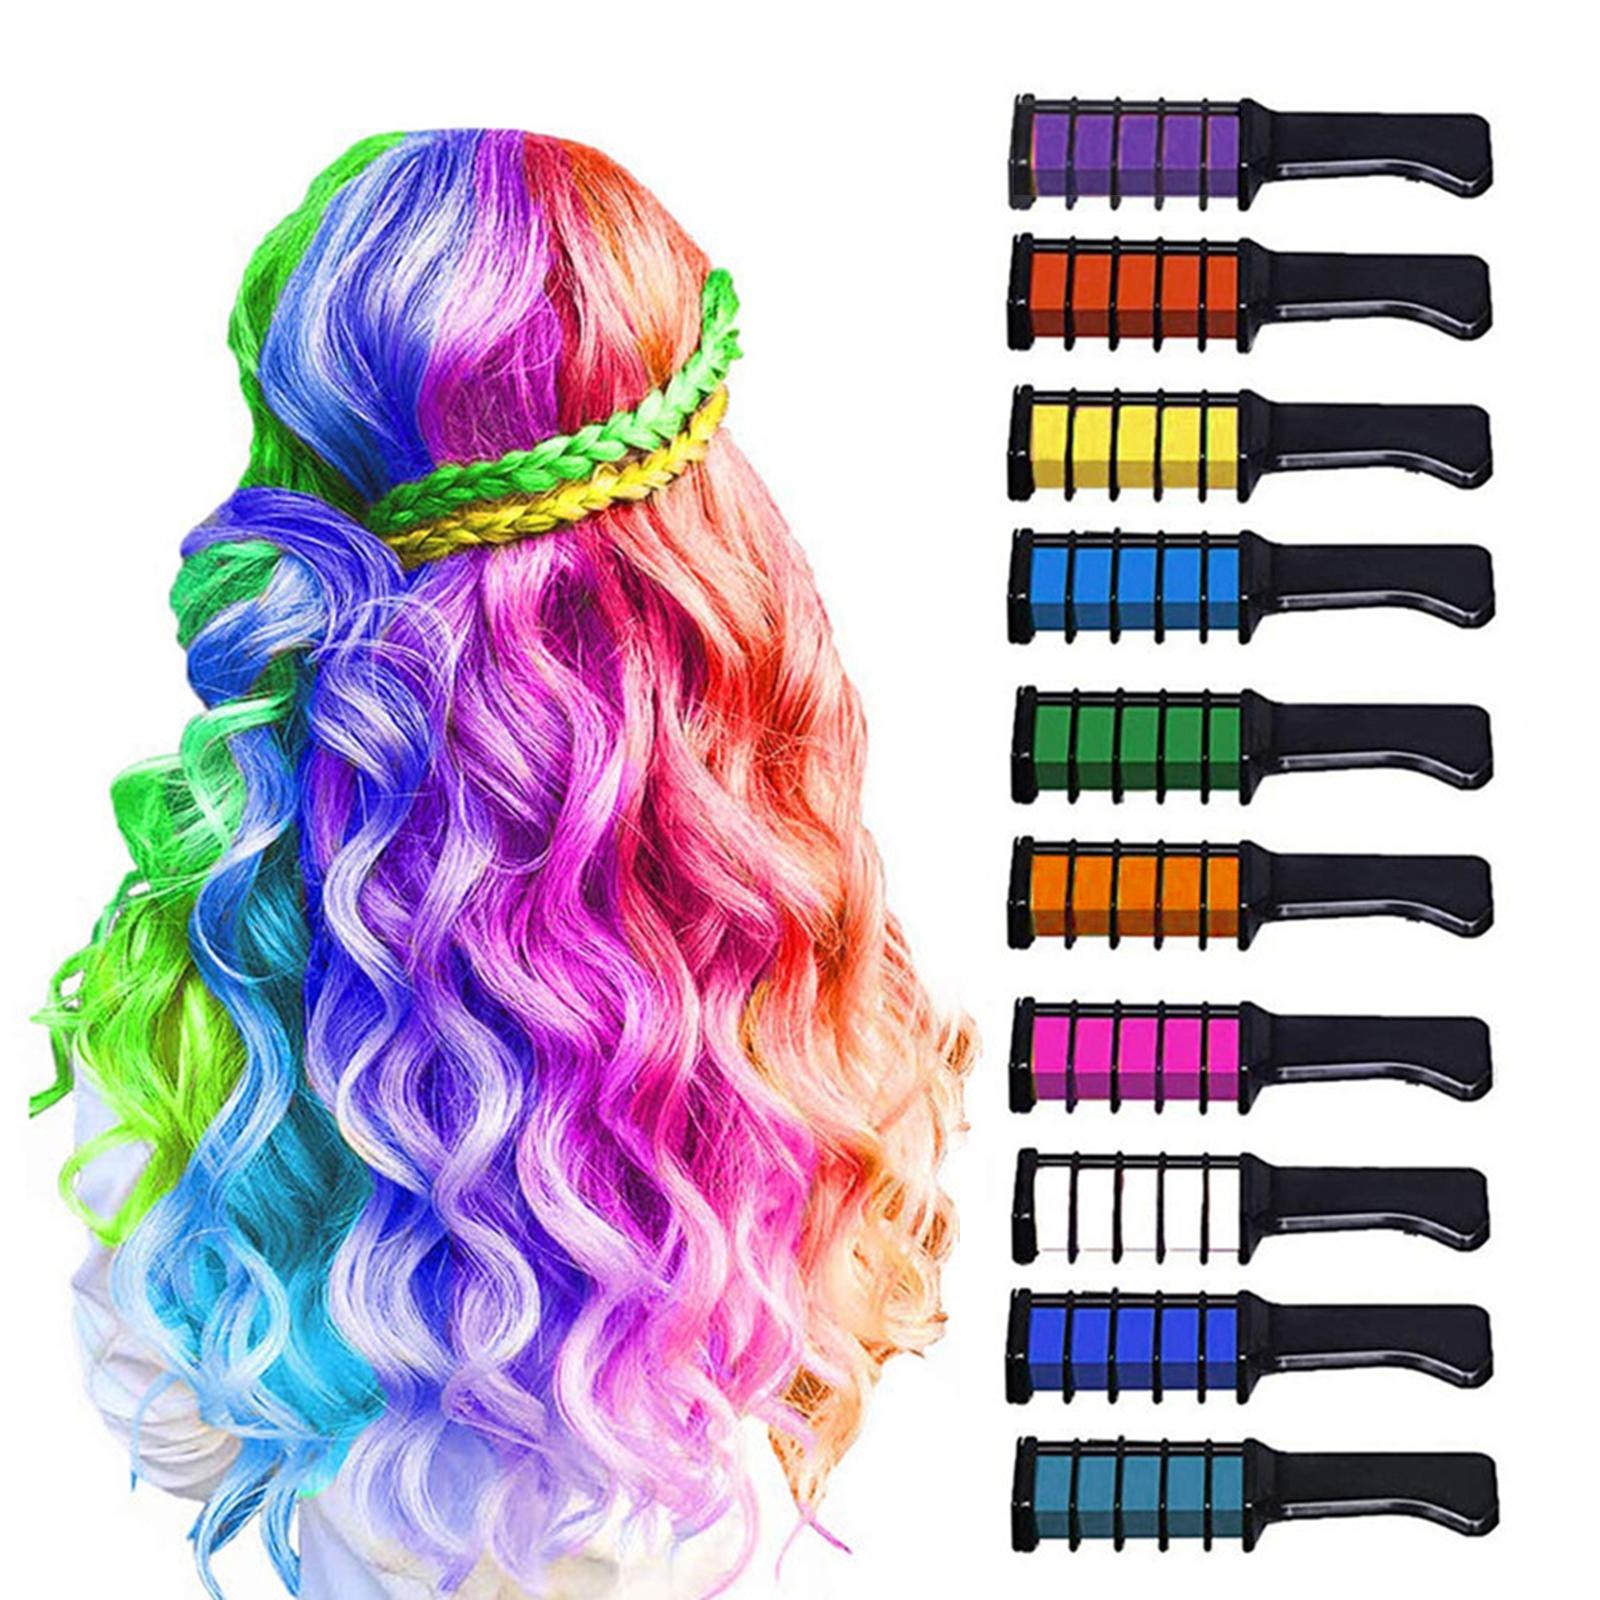 10 Colors Hair Chalk for Girls Kids Washable for Children's Day DIY Gifts